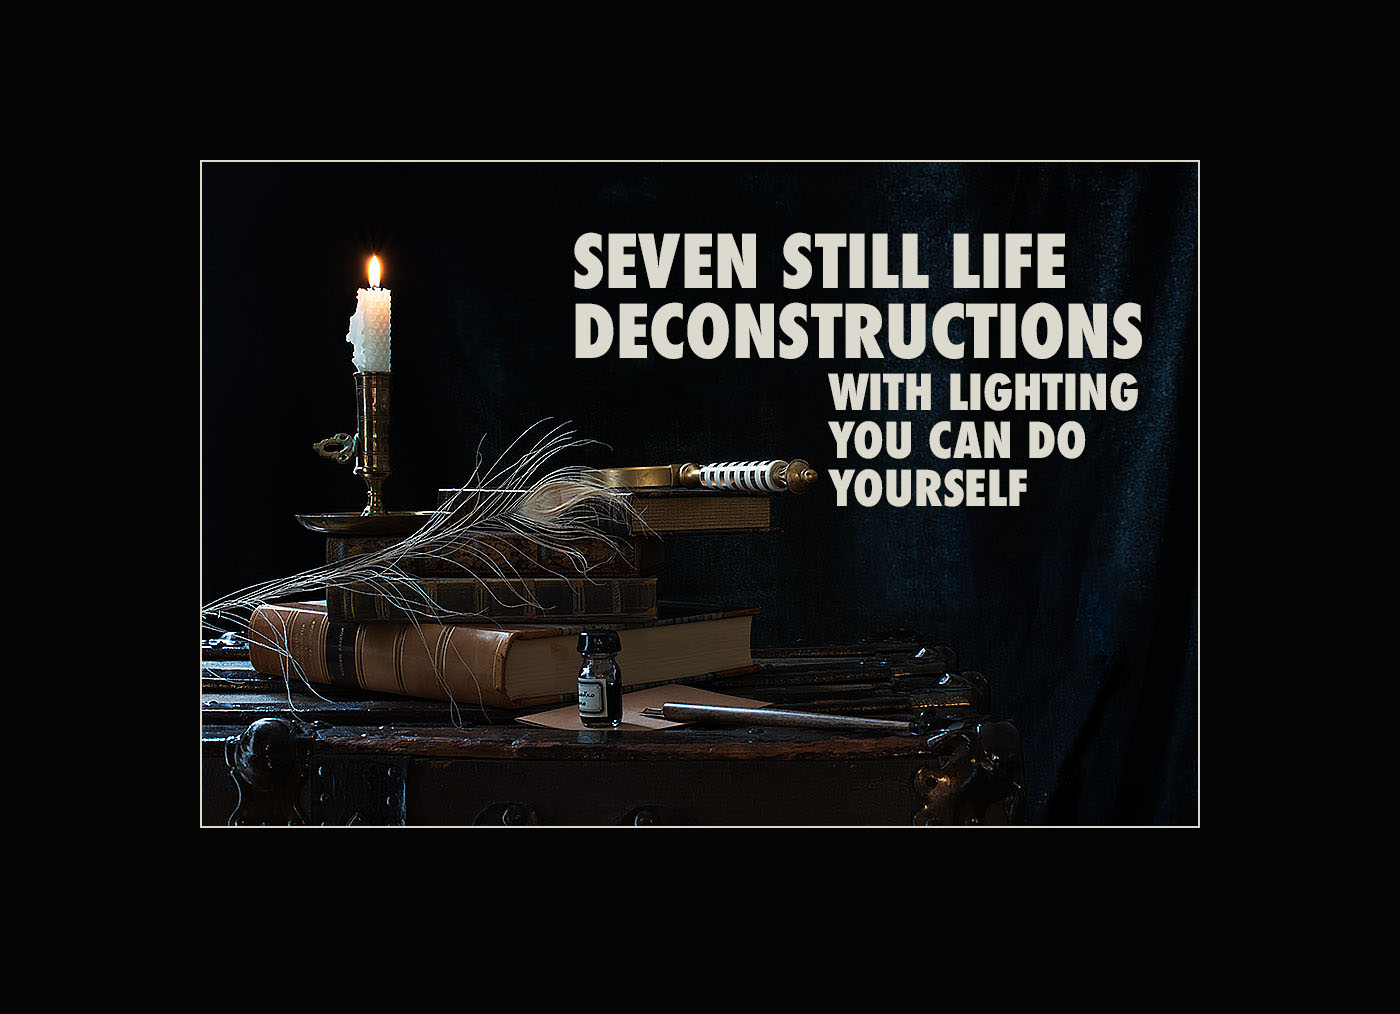 Still Life Images Deconstructed: Lighting You Can Do